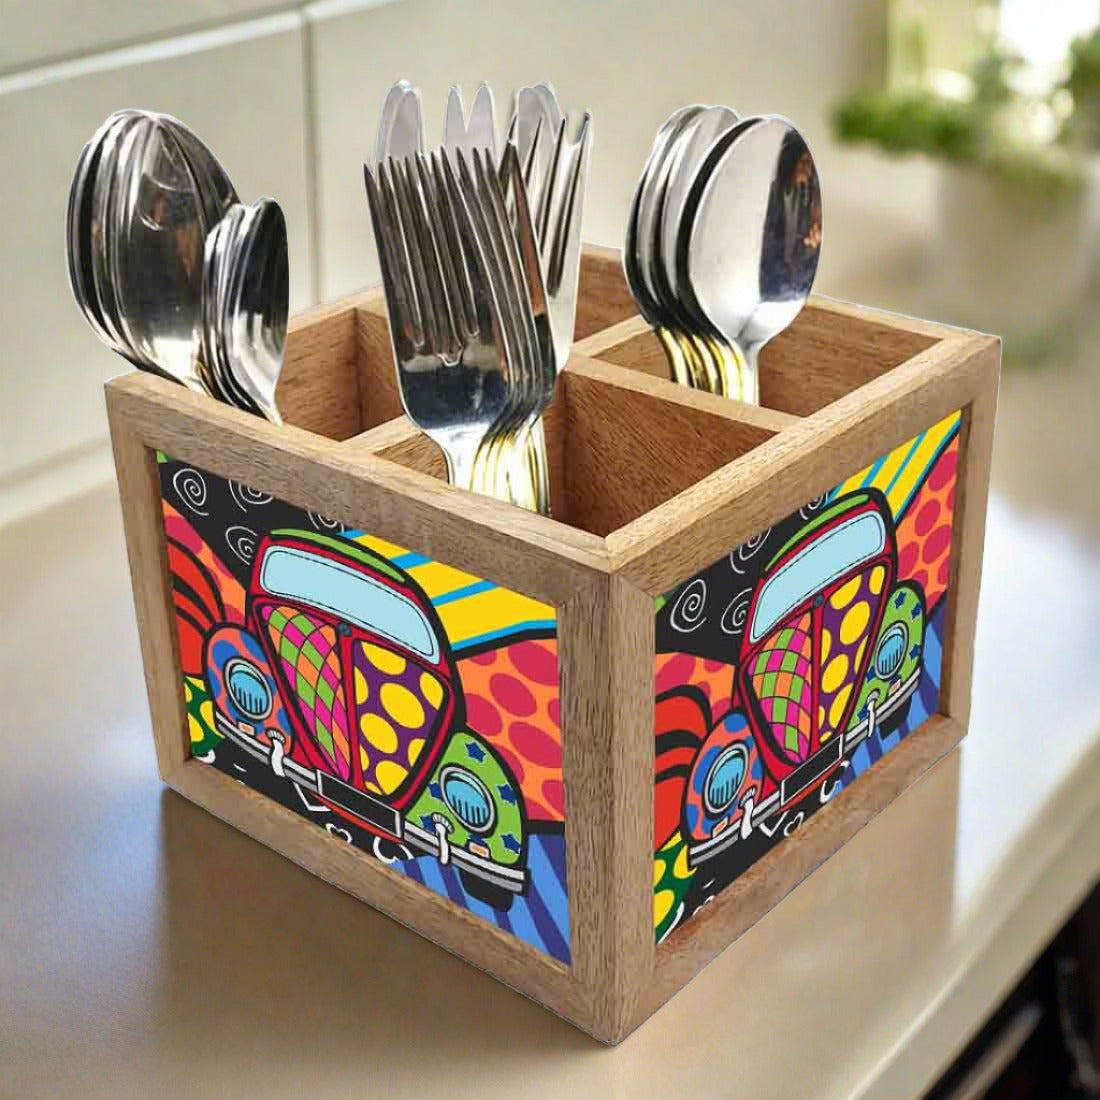 Cutlery Holder for Table Spoon Organizer Stand - Taxi Art Nutcase